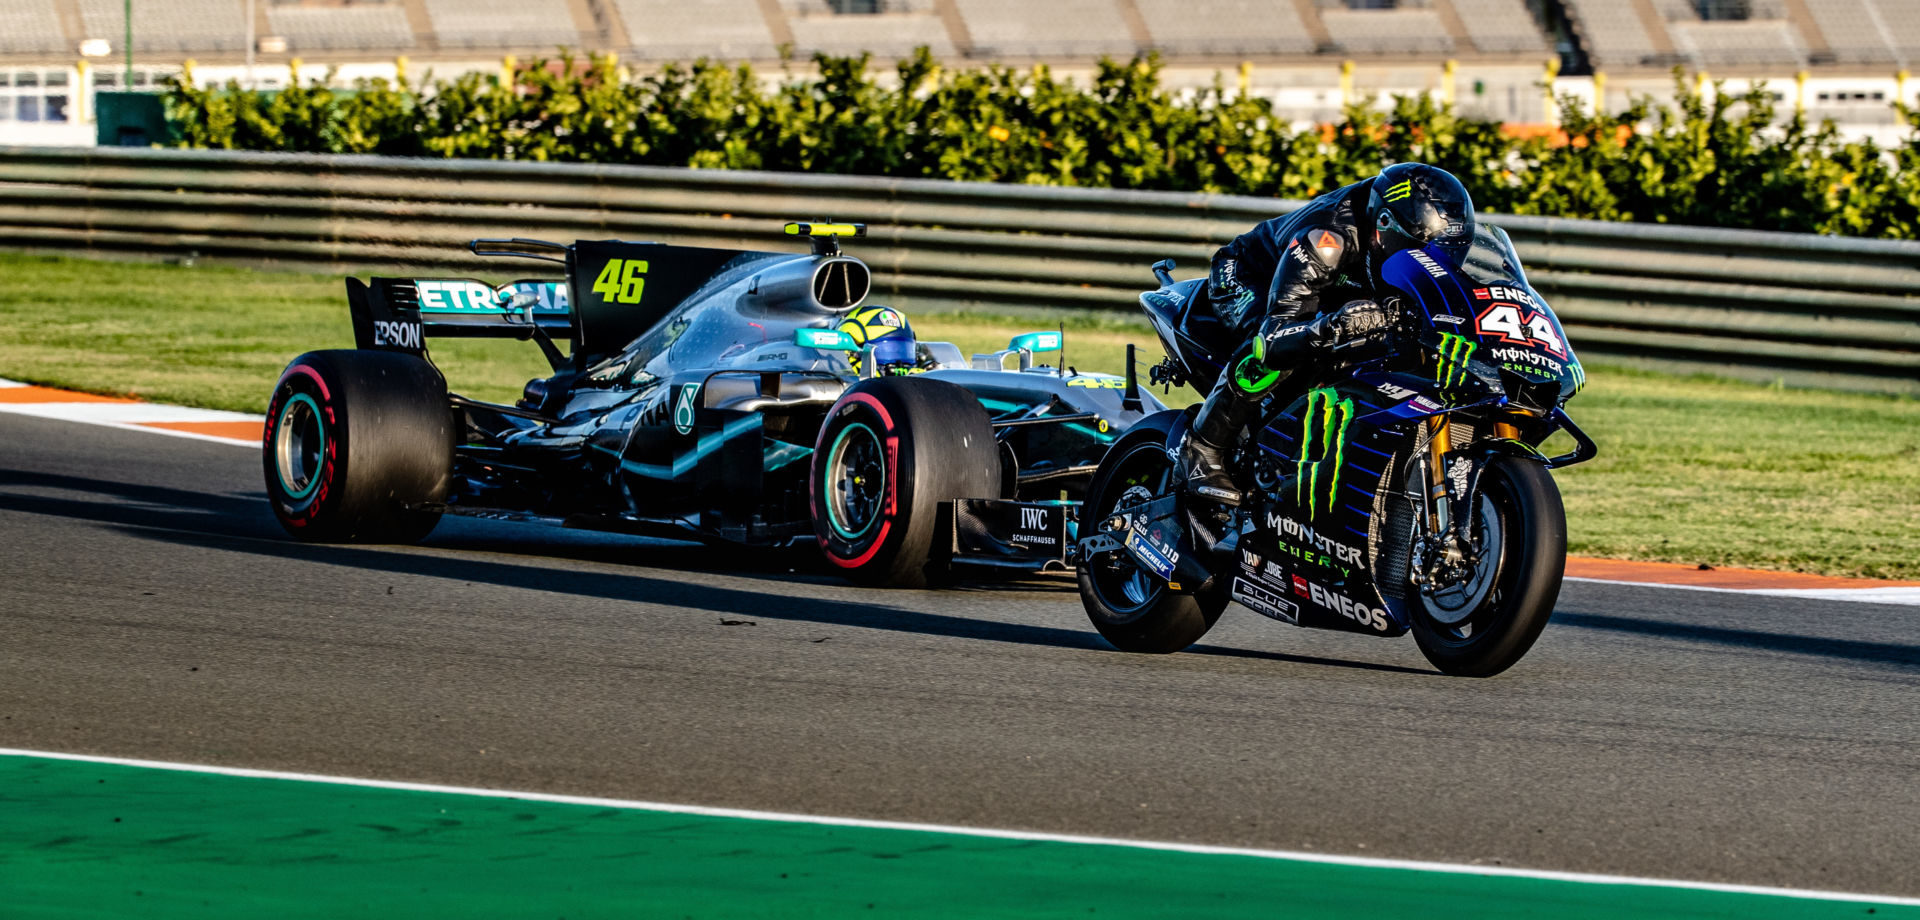 Formula One race car driver Lewis Hamilton (44) on a Monster Energy Yamaha YZR-M1 MotoGP racebike and MotoGP racer Valentino Rossi (46) in a Mercedes-AMG F1 W08 EQ Power+ Formula One race car at Valencia. Photo courtesy of Monster Energy Yamaha.